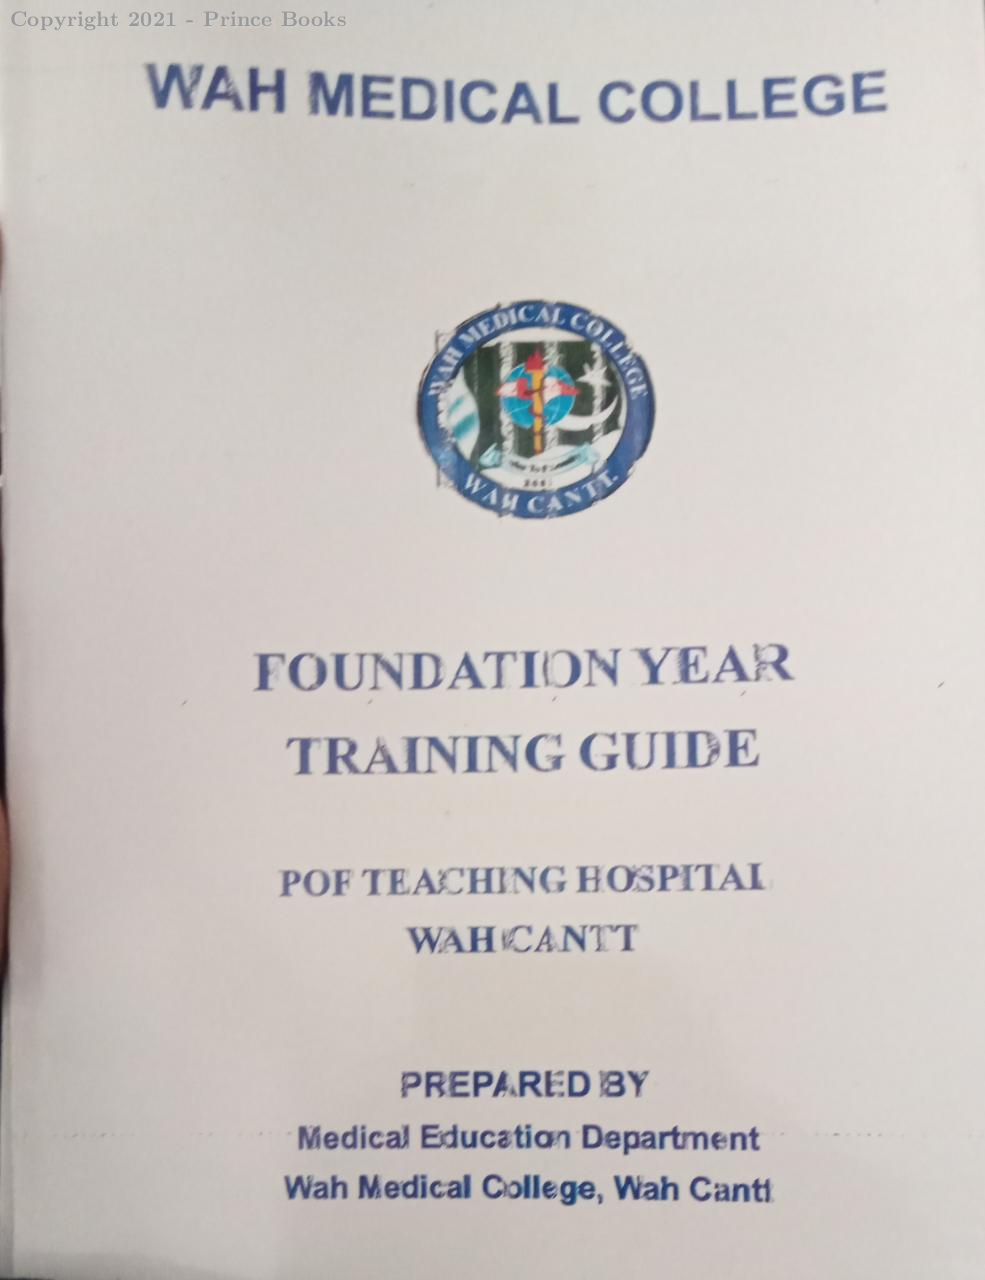 WAH MEDICAL COLLEGE foundation year training guide